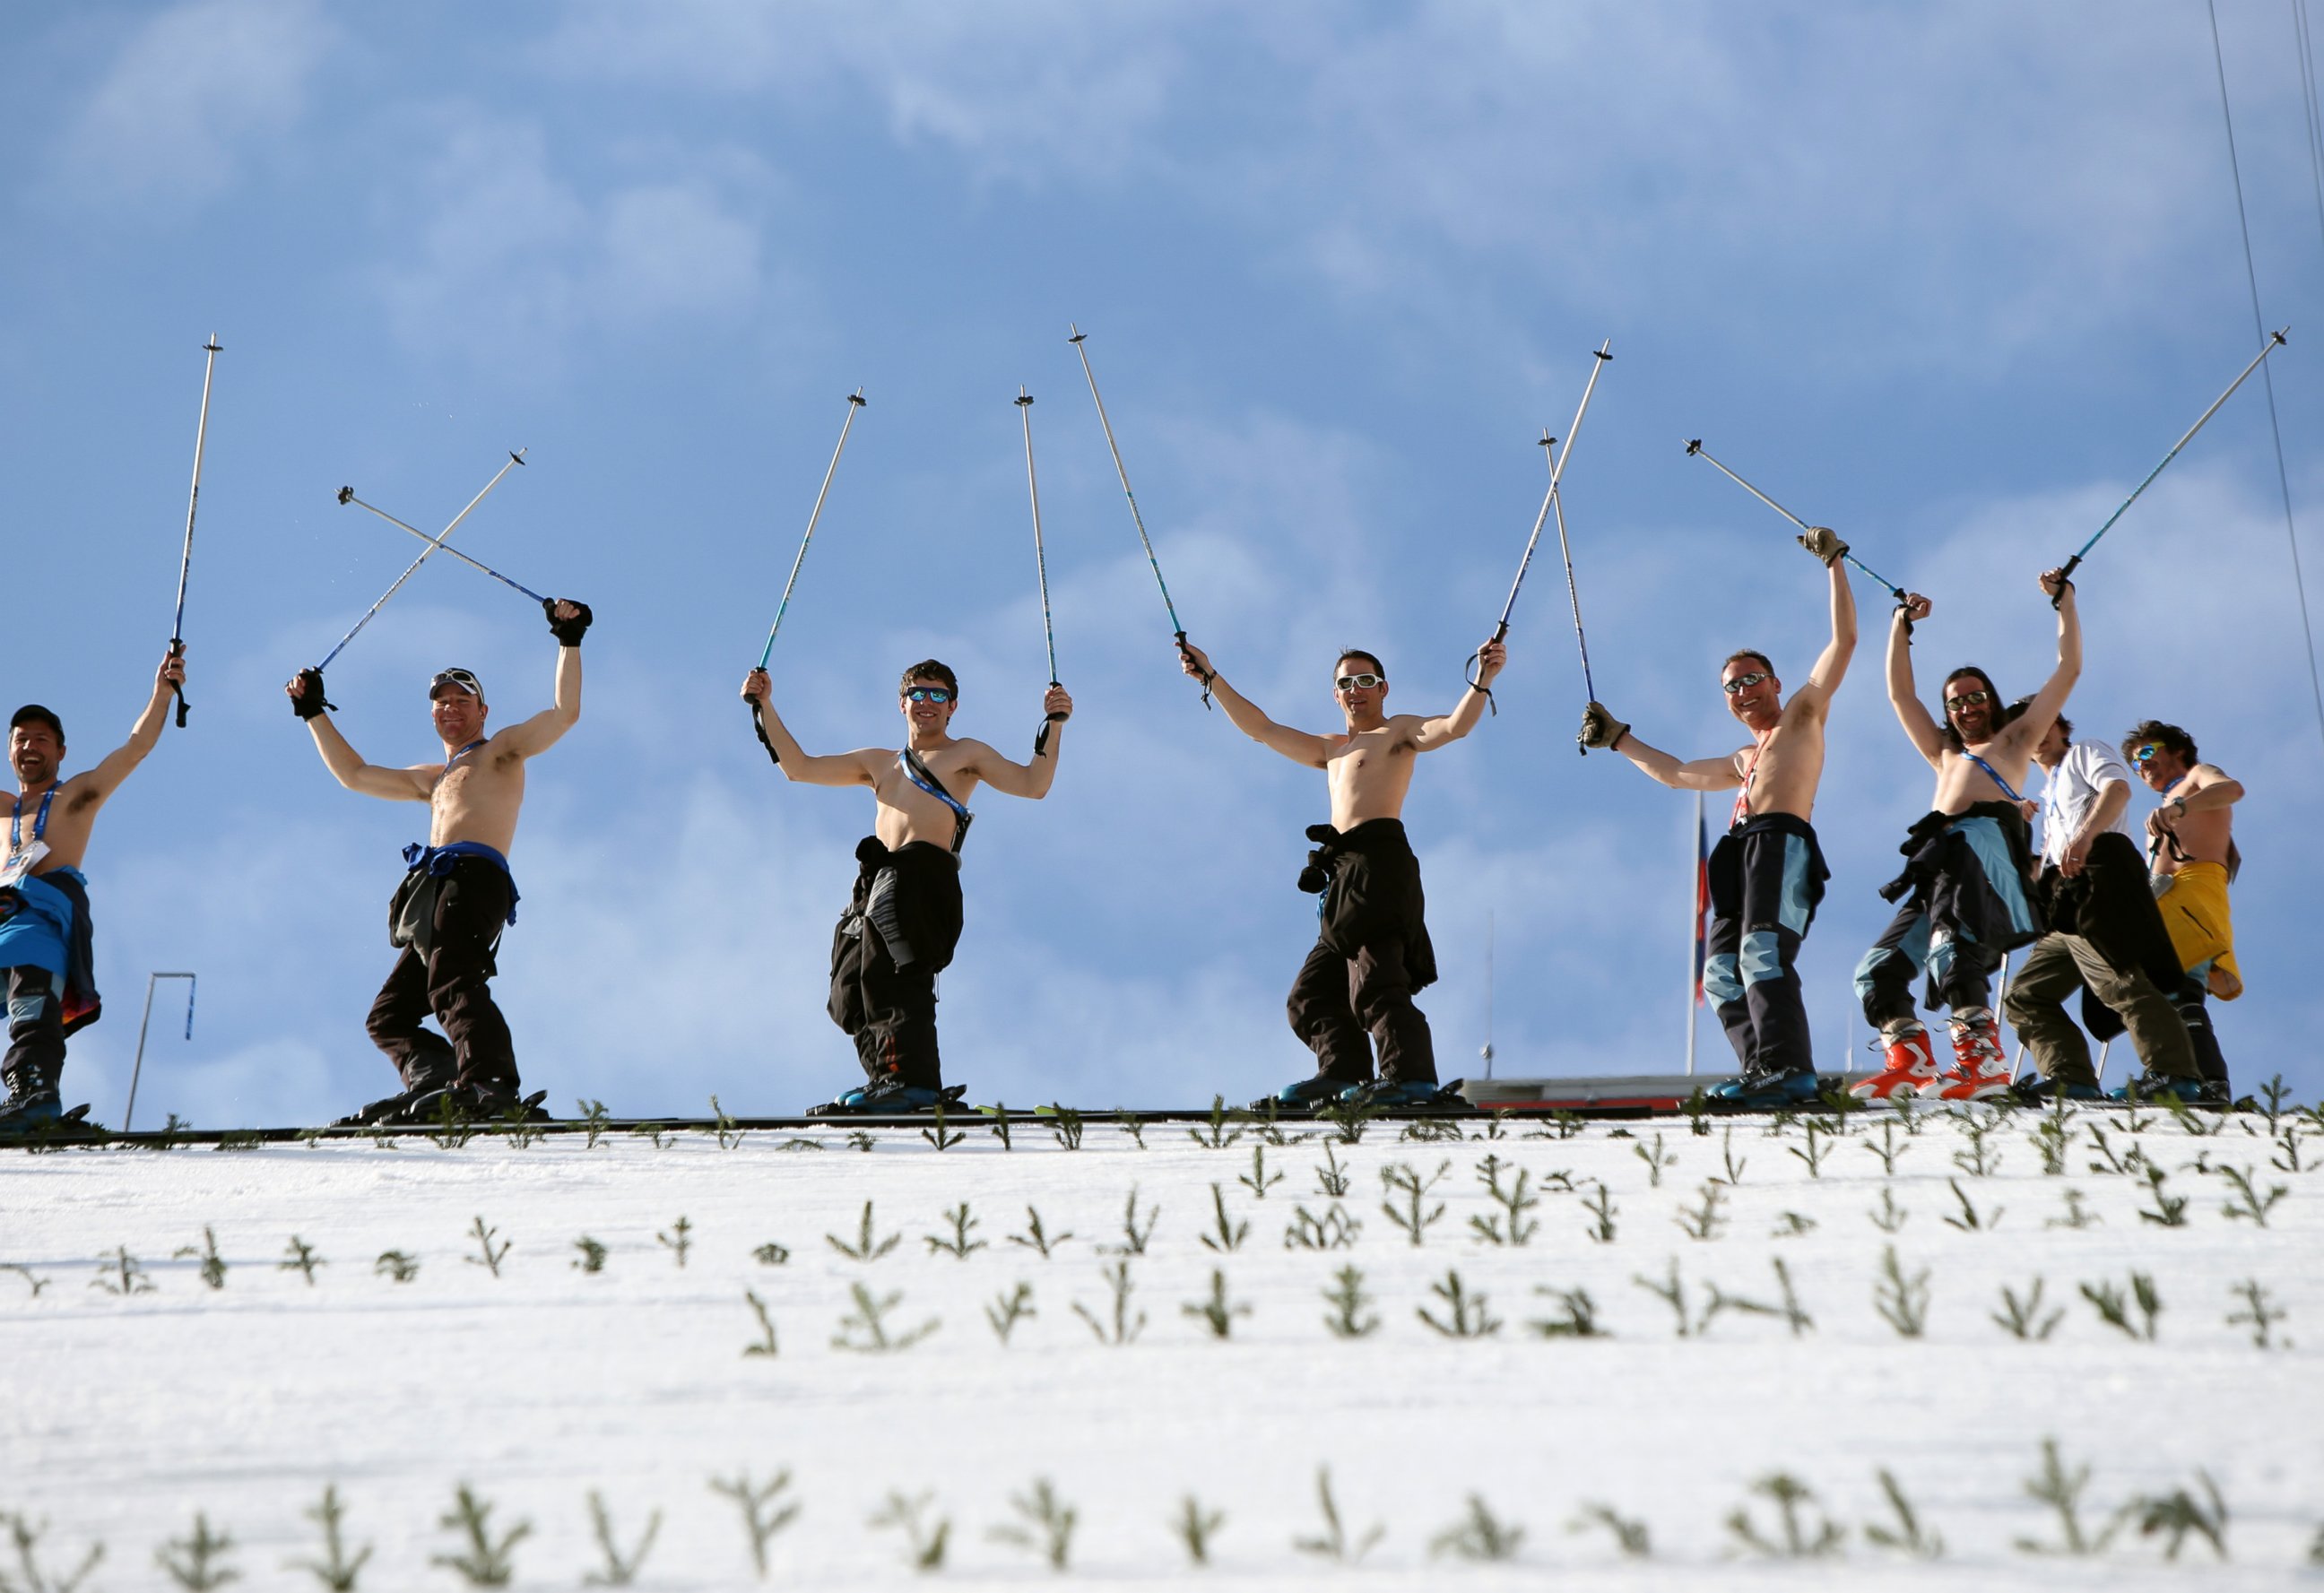 PHOTO:Course workers take off their shirts to enjoy the warm weather as they prepare the landing hill before the men's Nordic combined normal hill training jump at the RusSki Gorki Jump Center at the 2014 Sochi Winter Olympics.